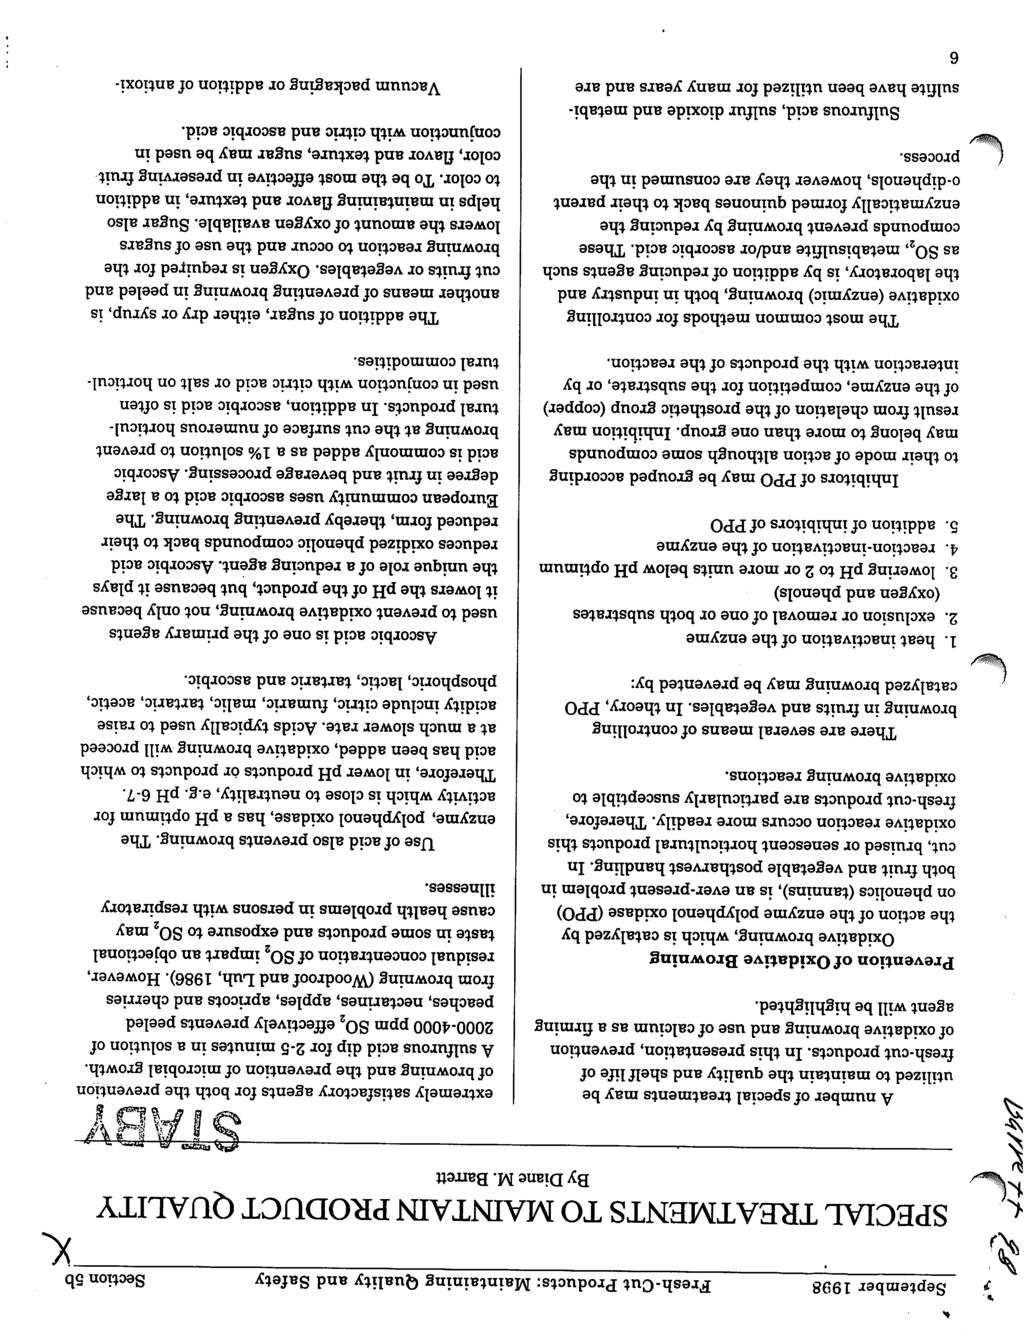 > September 1998 Fresh-Cut Products: Maintaining Quality and Safety Section 5b SPECIAL TREATMENTS TO MAINTAIN PRODUCT QUALITY By Diane M.